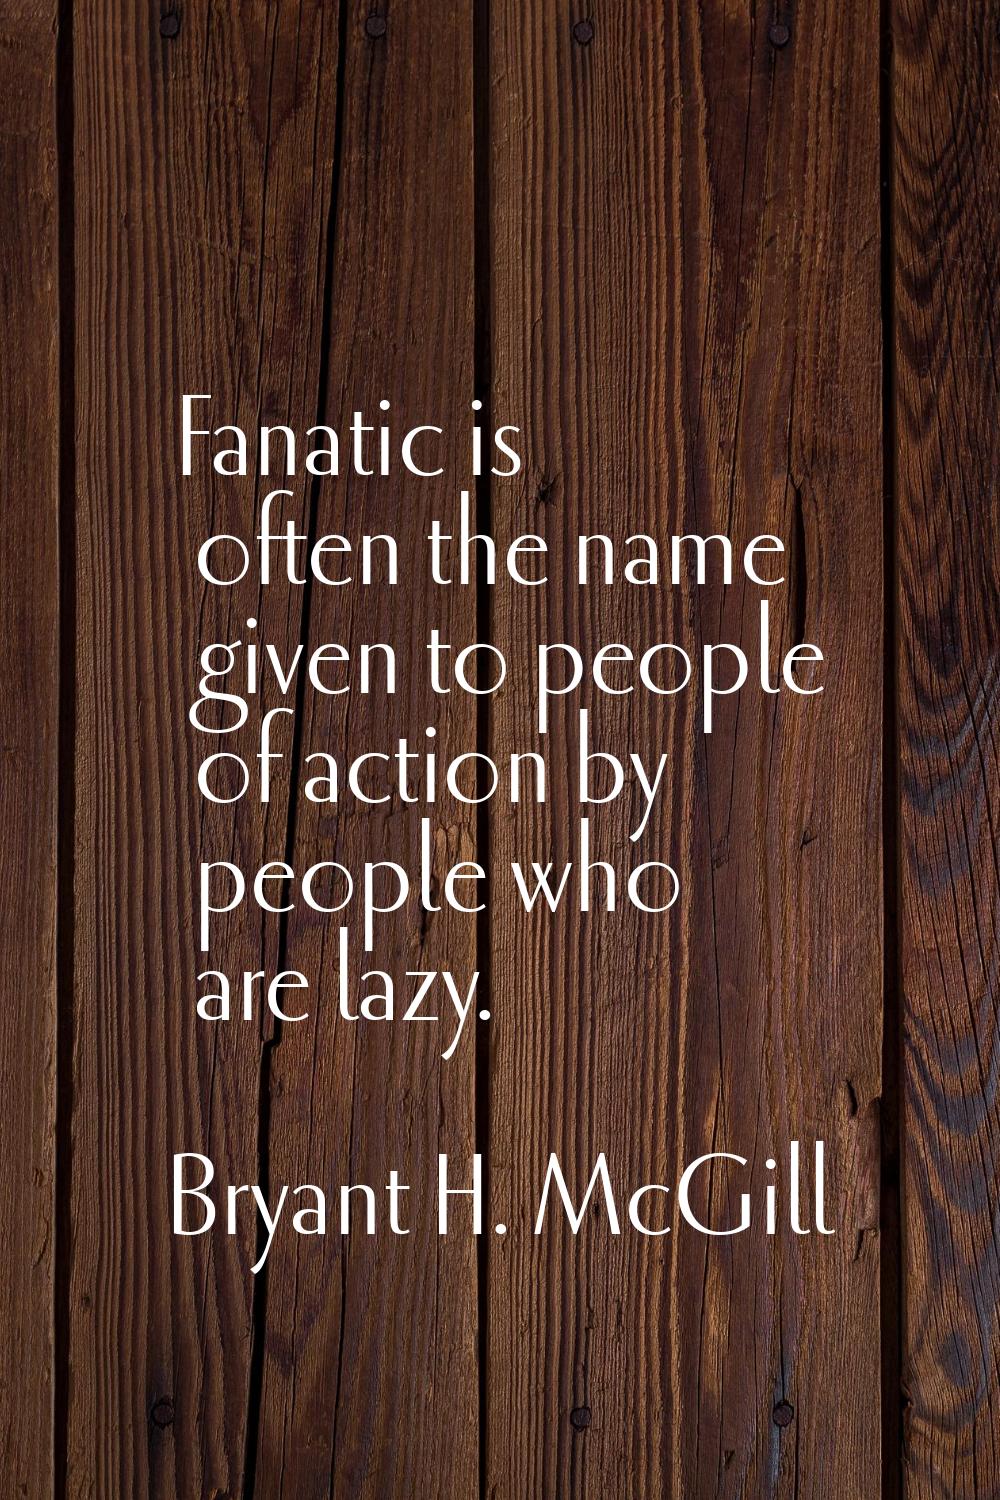 Fanatic is often the name given to people of action by people who are lazy.